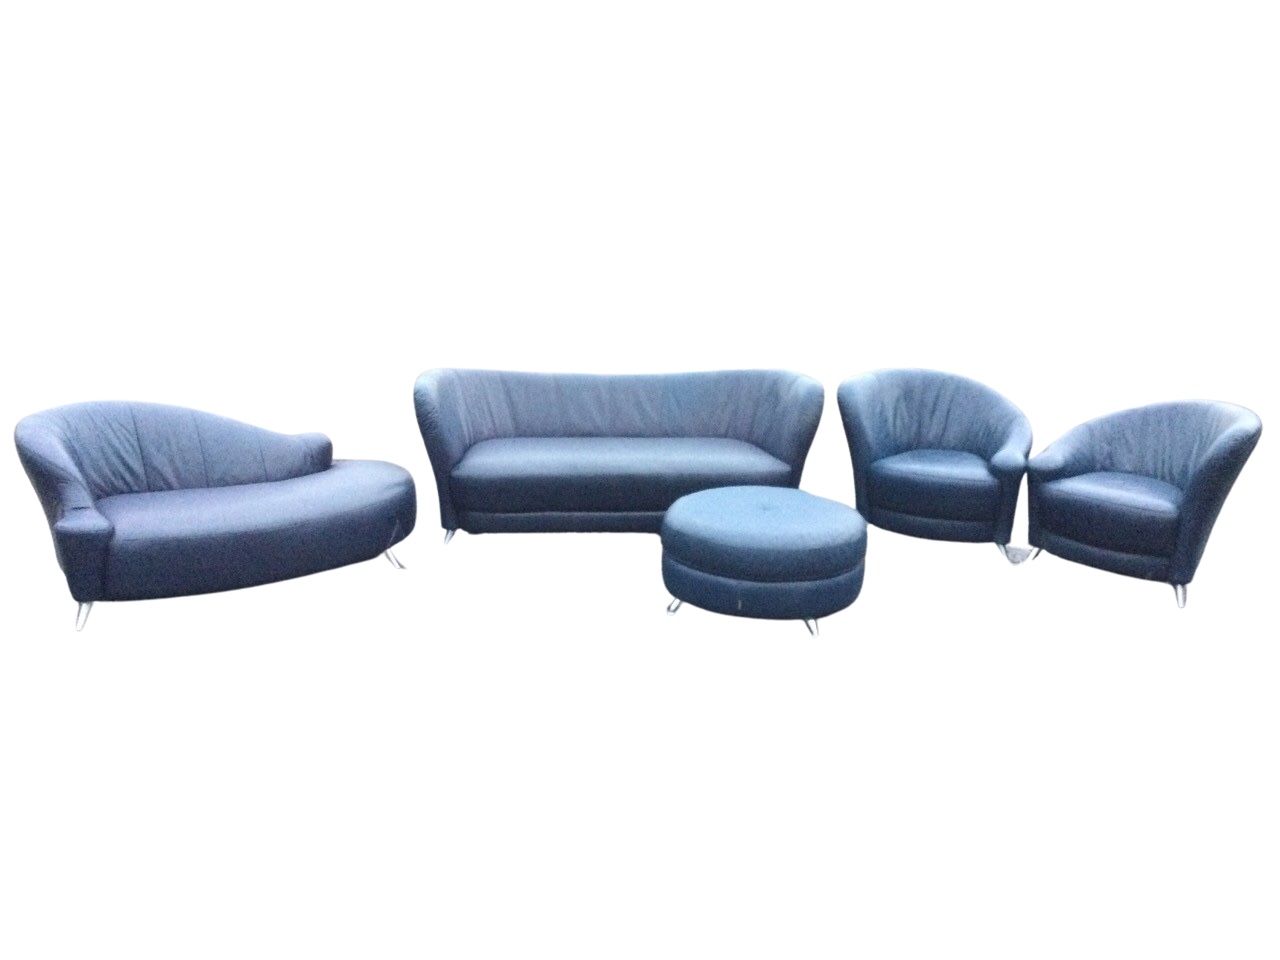 A contemporary Italian leather suite by Melandas, with chaise longue, sofa, pouffe, and pair of